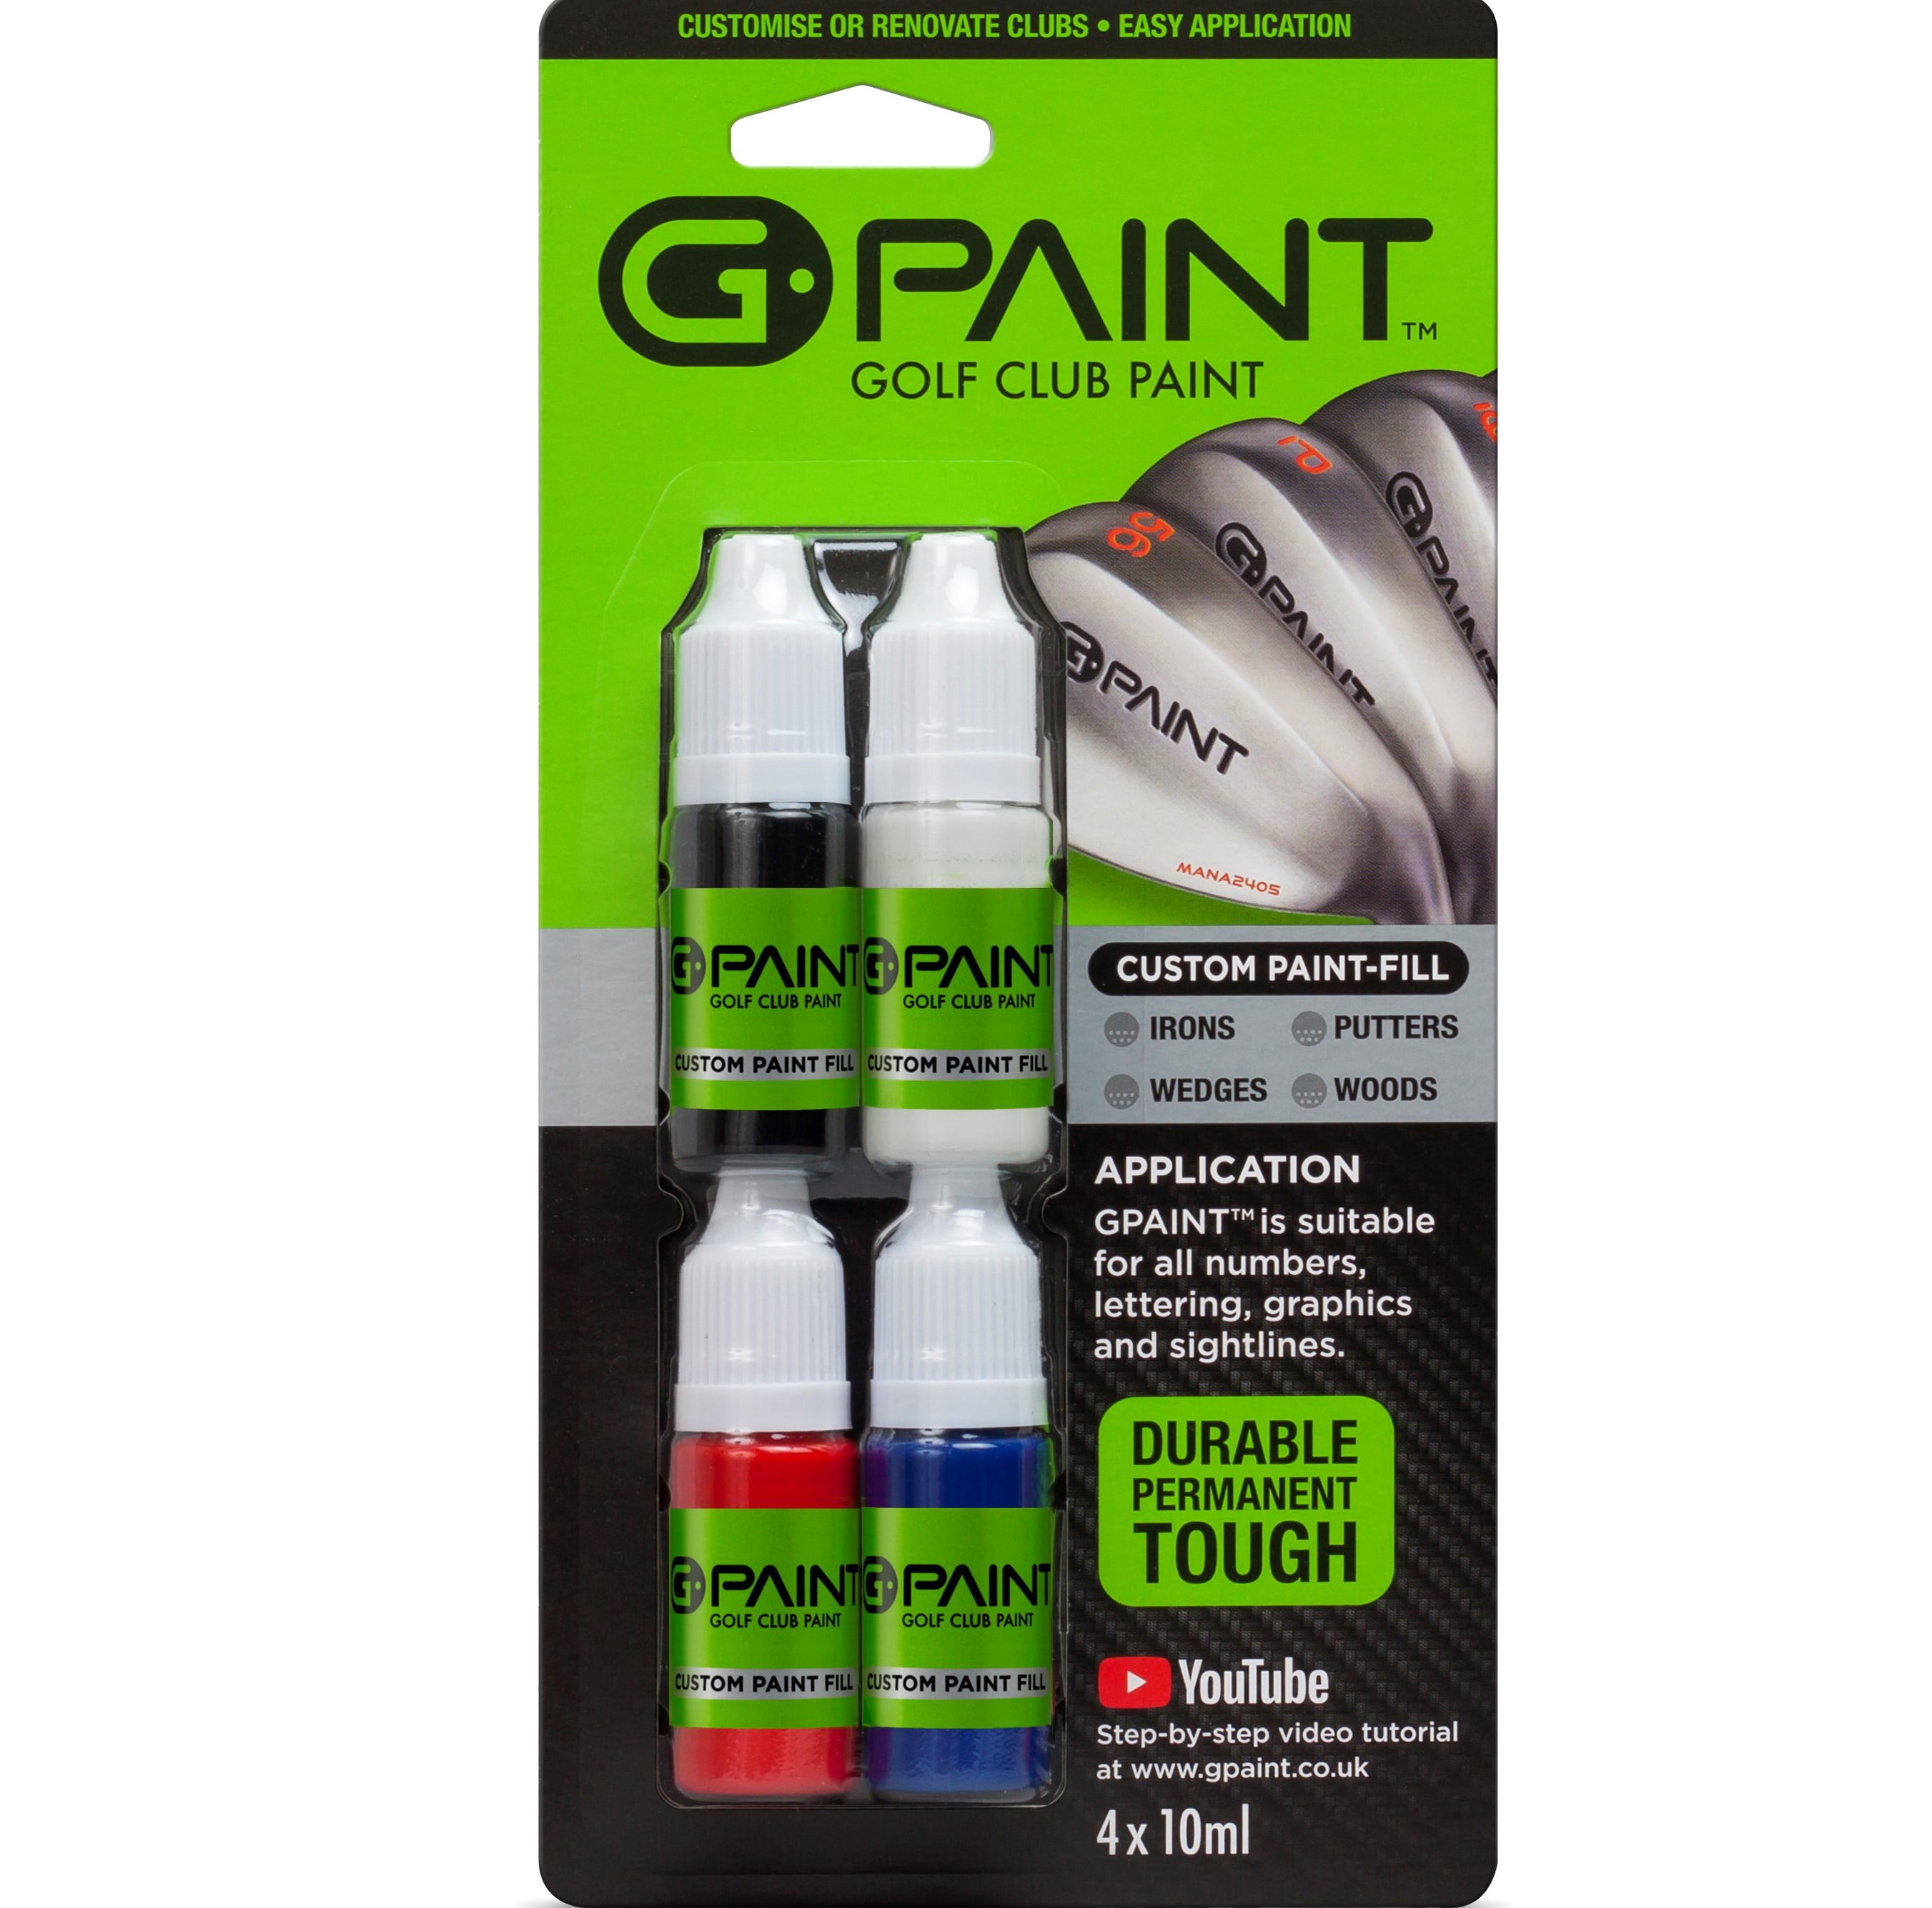 G-Paint Golf Club Paint - Touch Up, Fill In, Customise or Renovate Your  Clubs - 4 Pack of 10ml Bottles. Black, White, Red & Blue